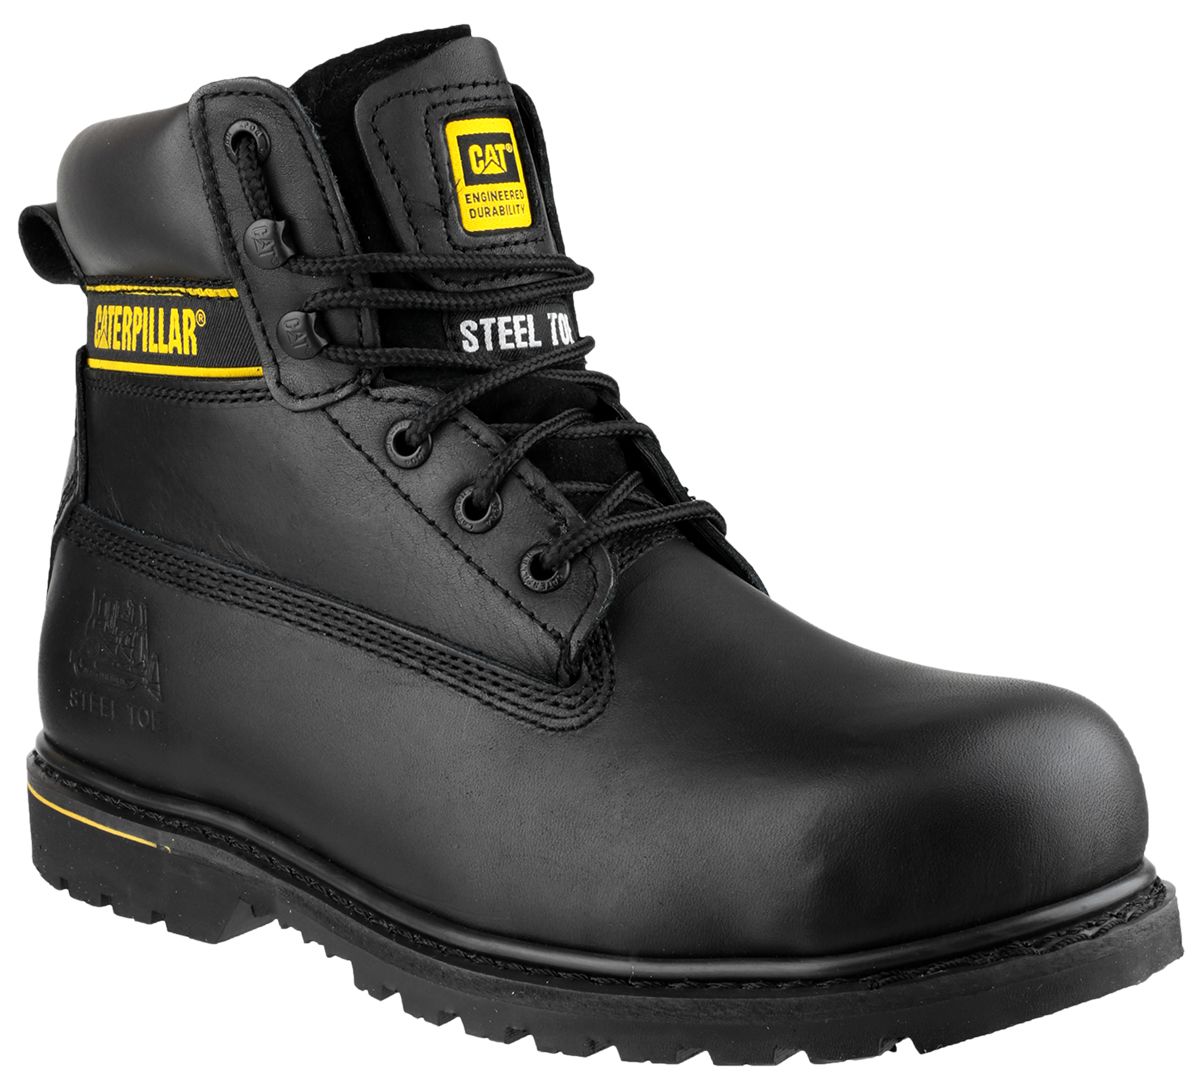 CAT Holton Black Steel Toe Capped Mens Safety Boots, UK 9, EU 43